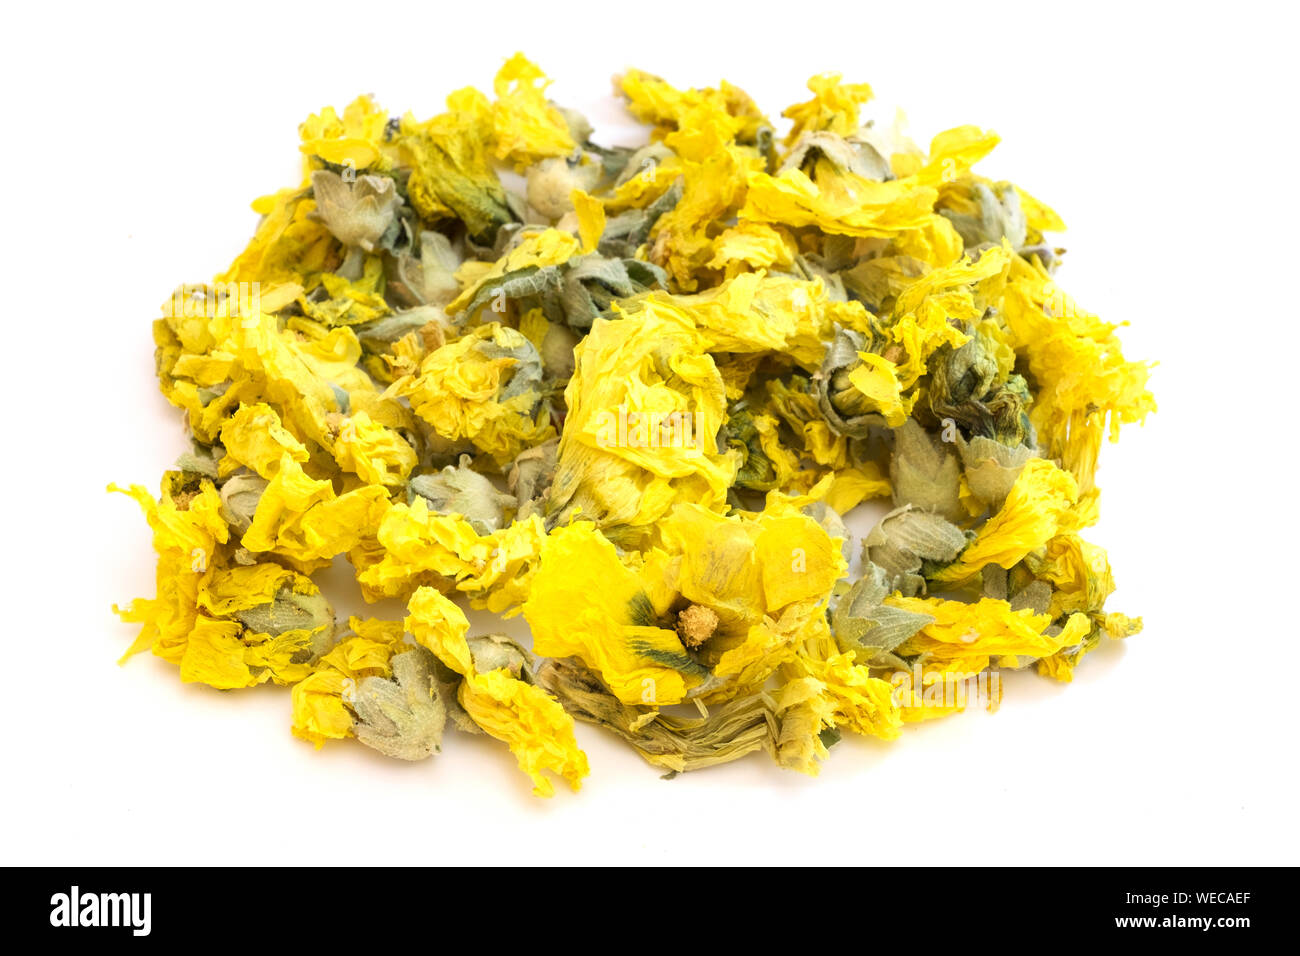 Dried flowers of marsh mallow (Althaea officinalis) on a white background Stock Photo